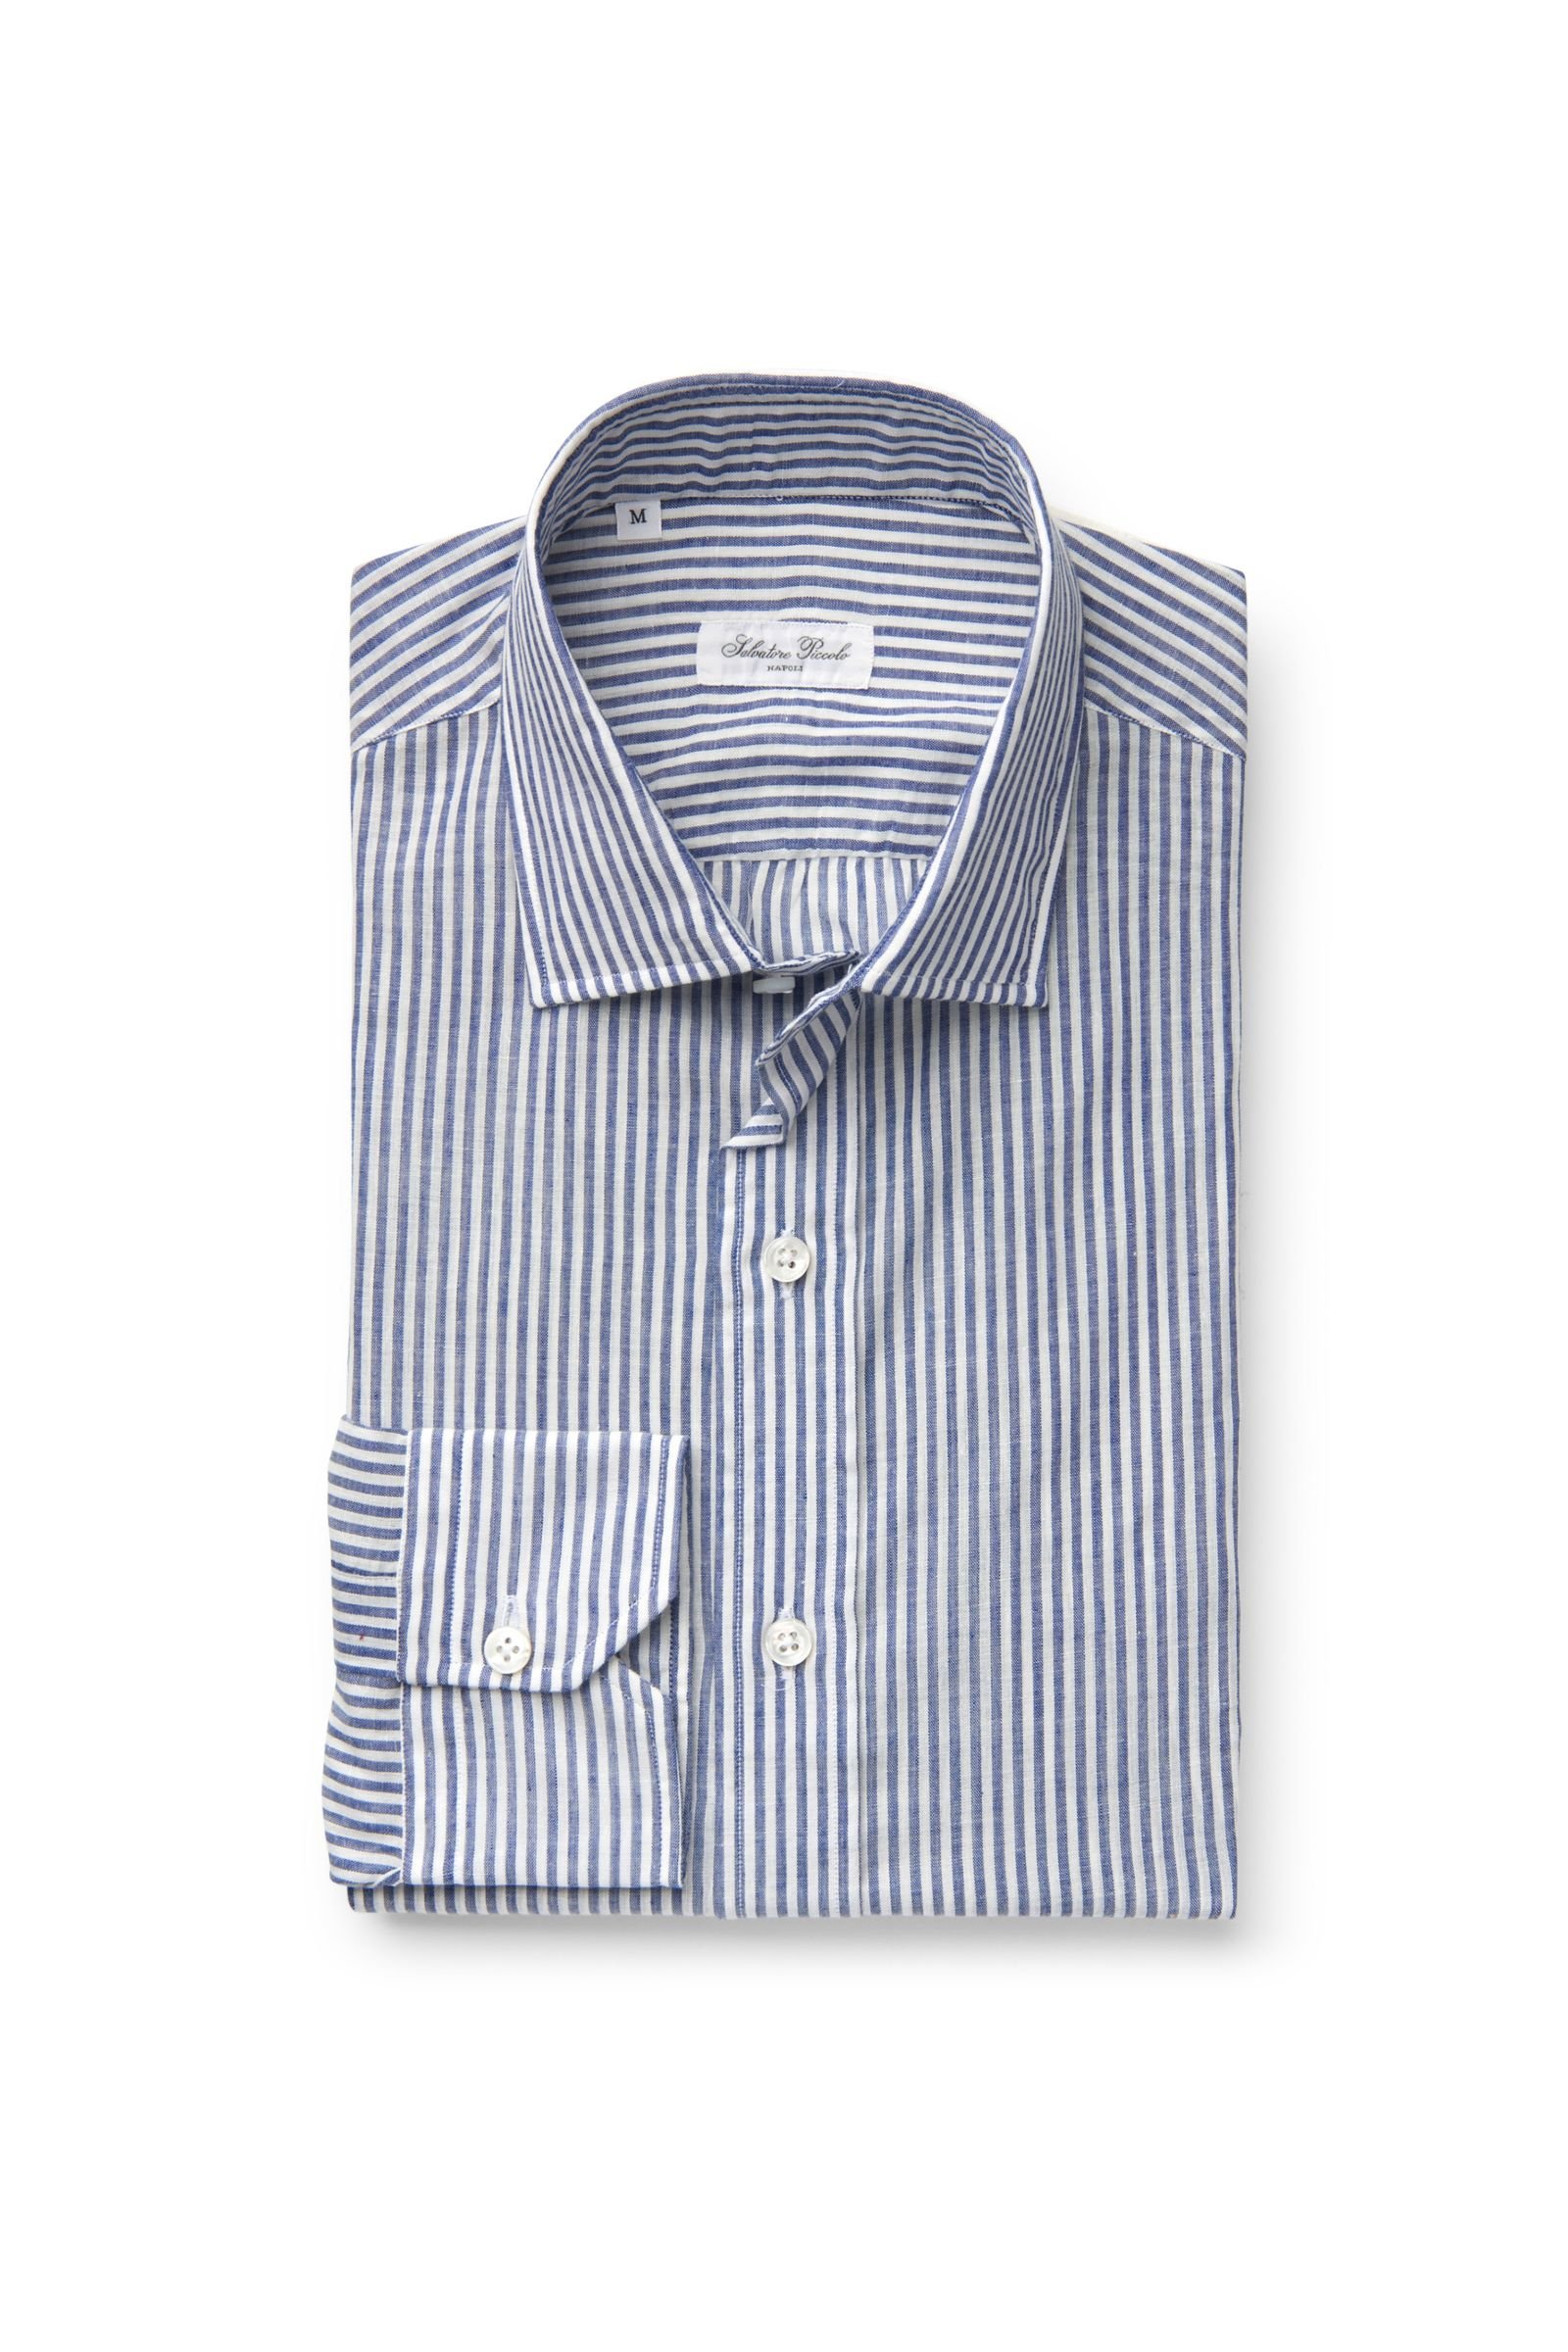 Casual shirt with a shark collar, navy striped